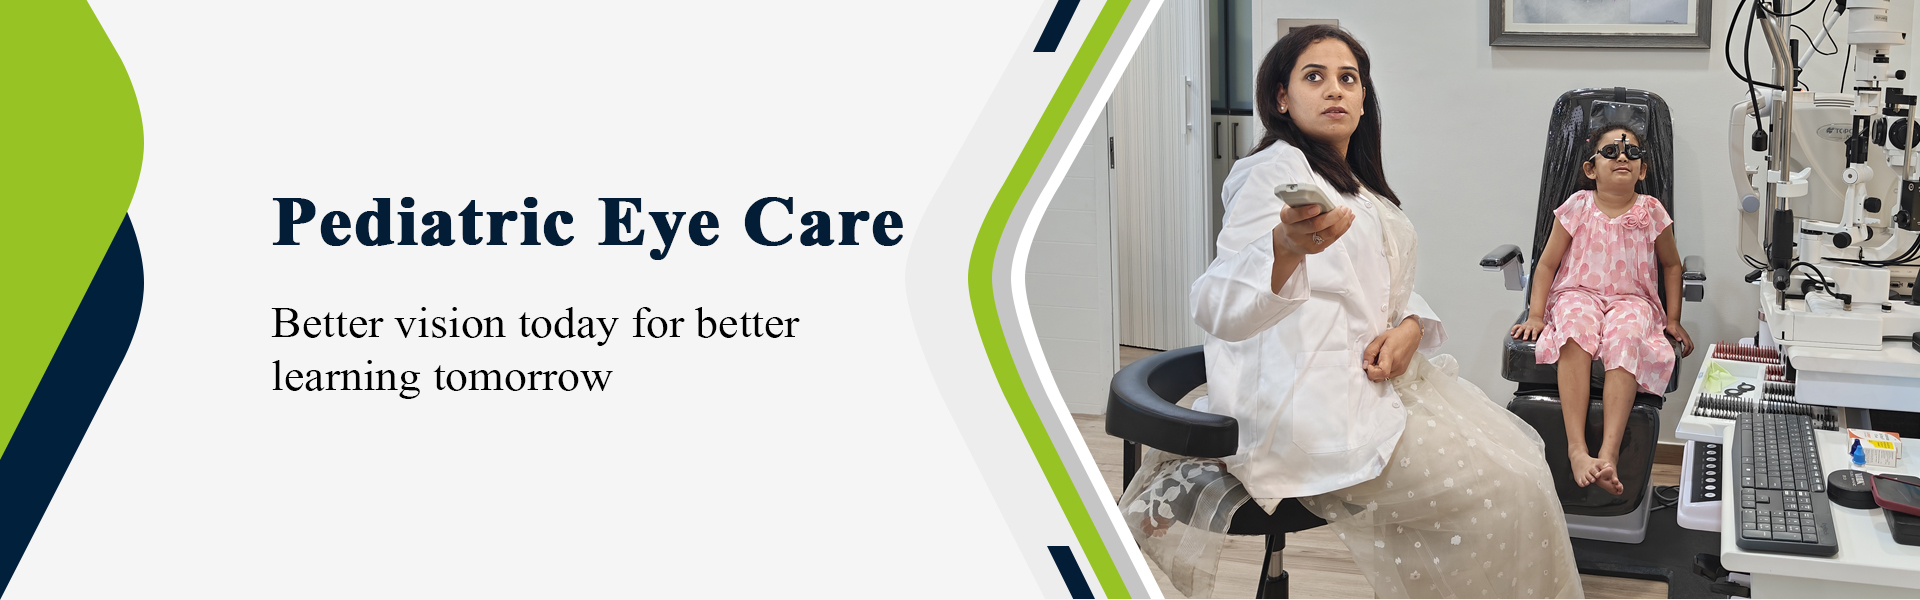 Best Paediatric Eye Care & Ophthalmologists at Arunodaya Eye Clinic in Wakad, Pune by Dr. Anuprita Gandhi Bhatt, Top Opthamologist in Pune.